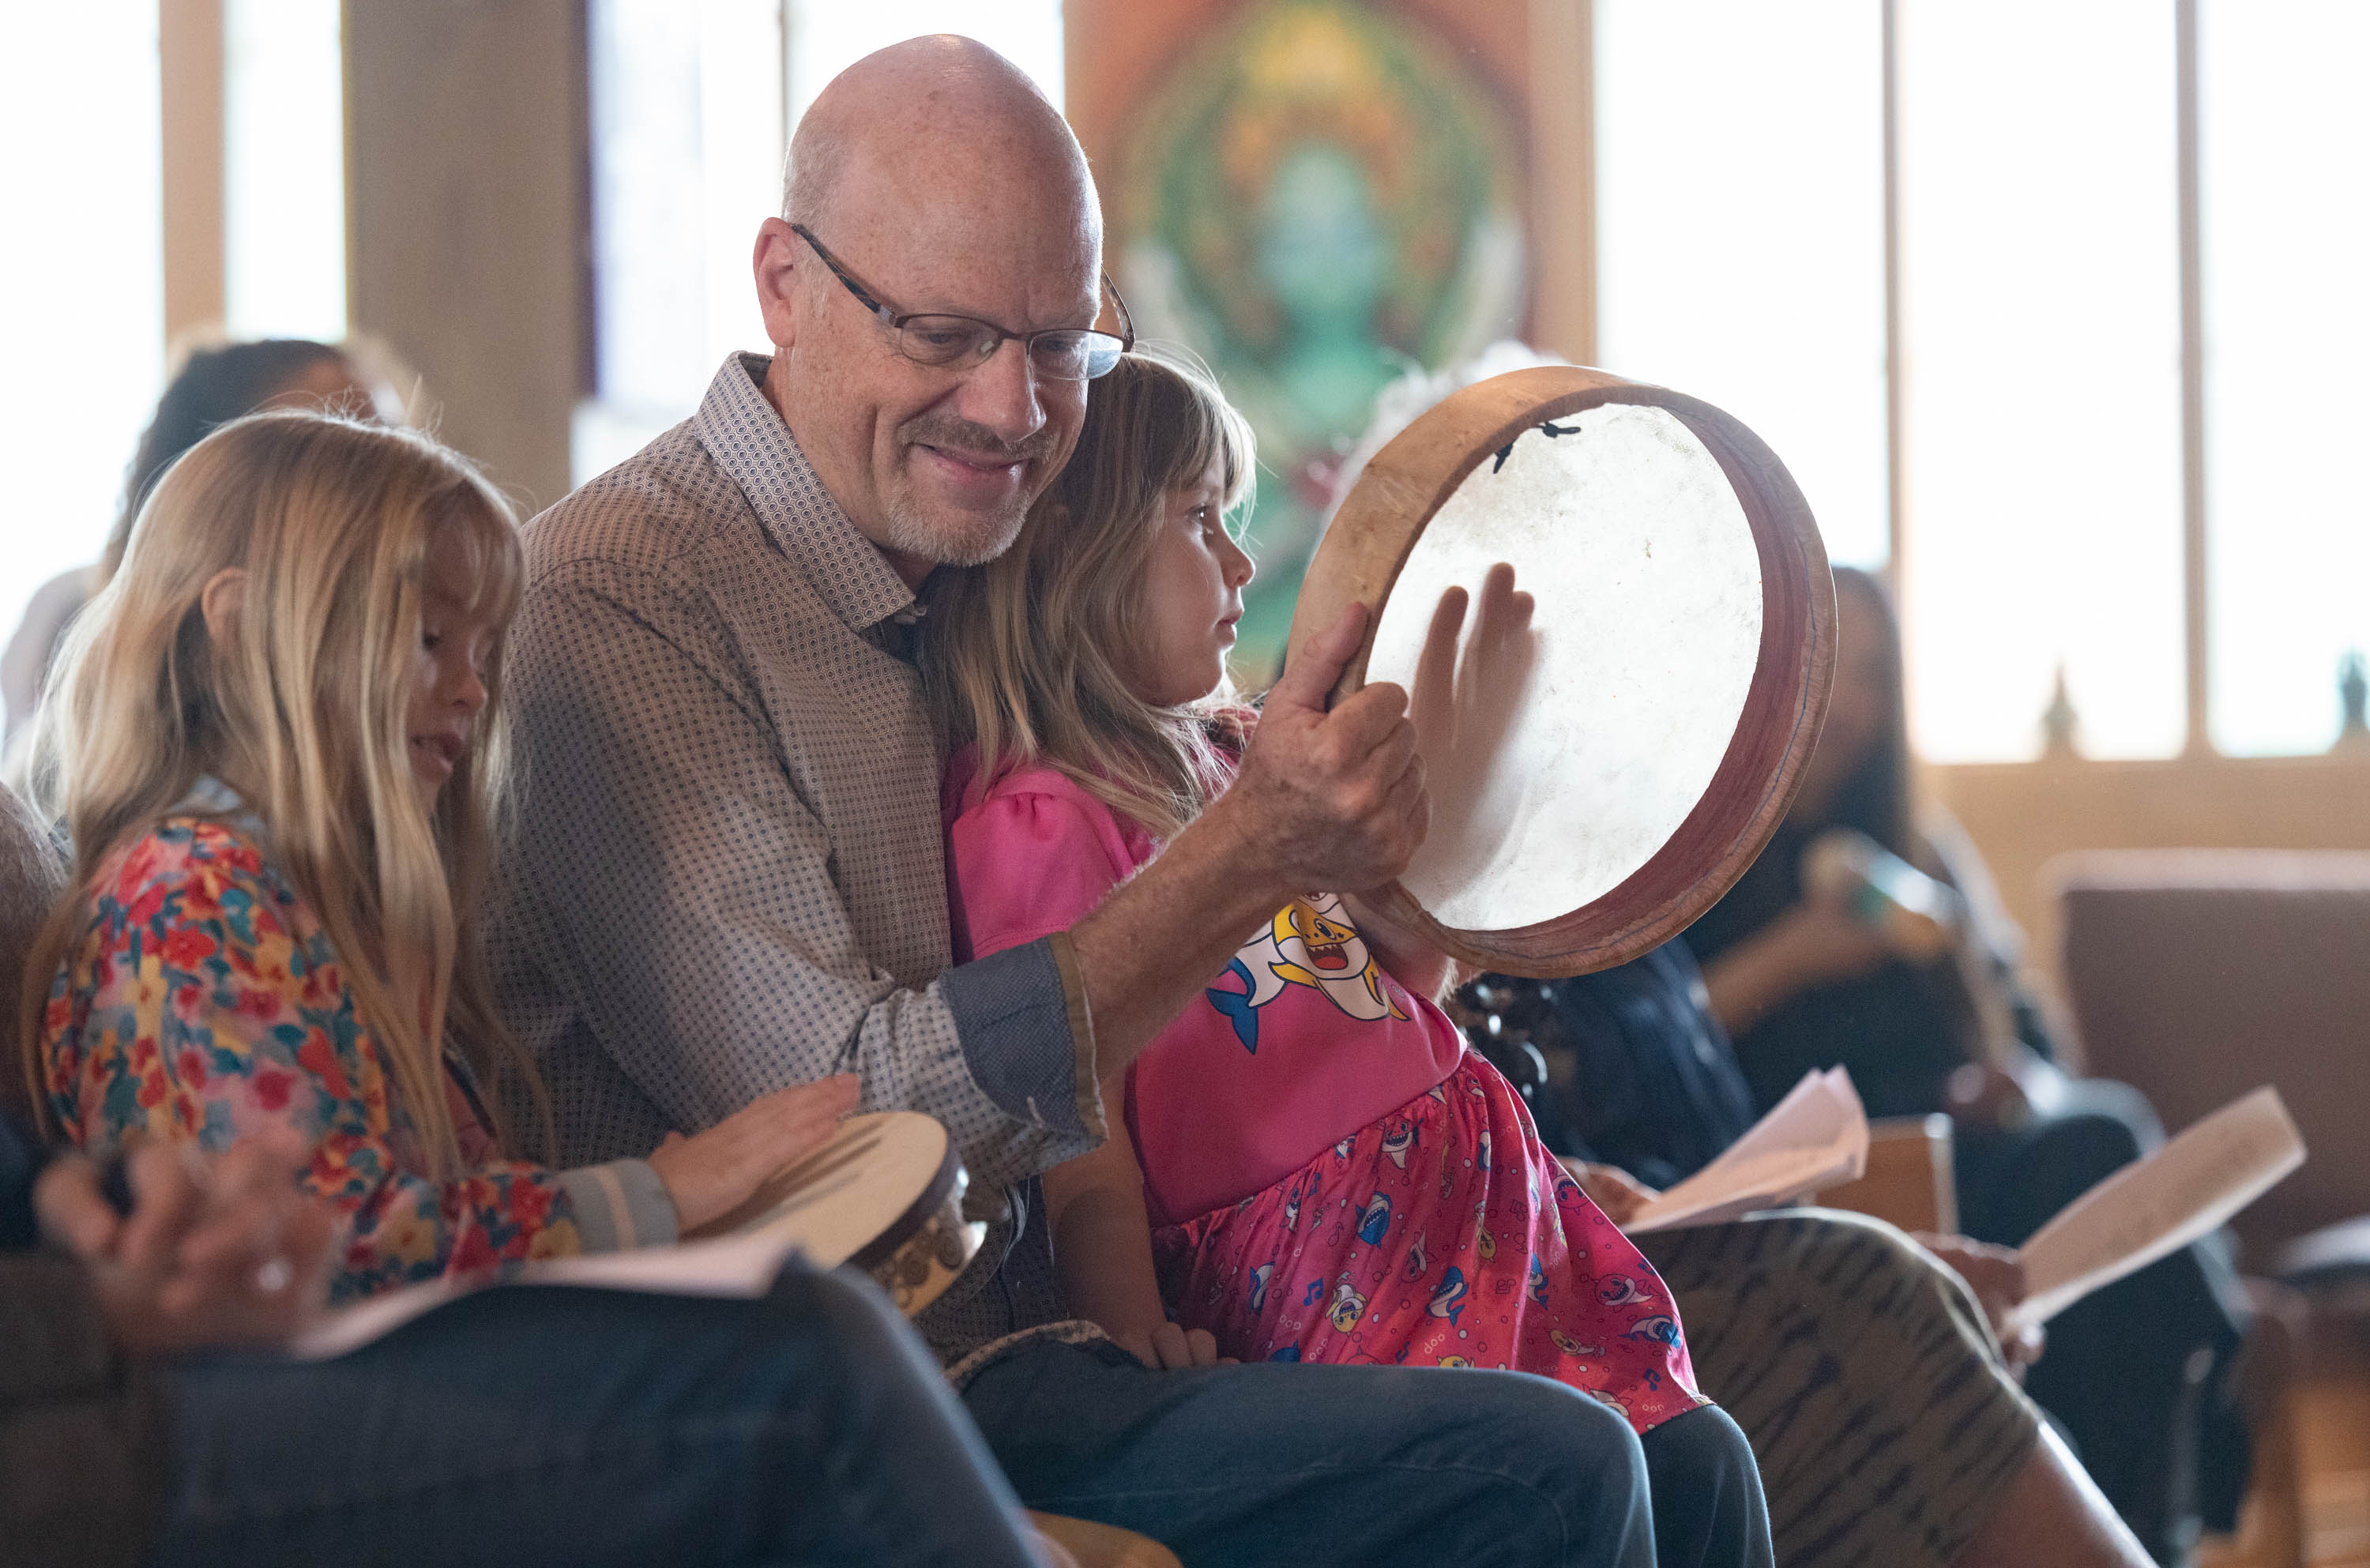 A man and 2 children play a drum during a church service